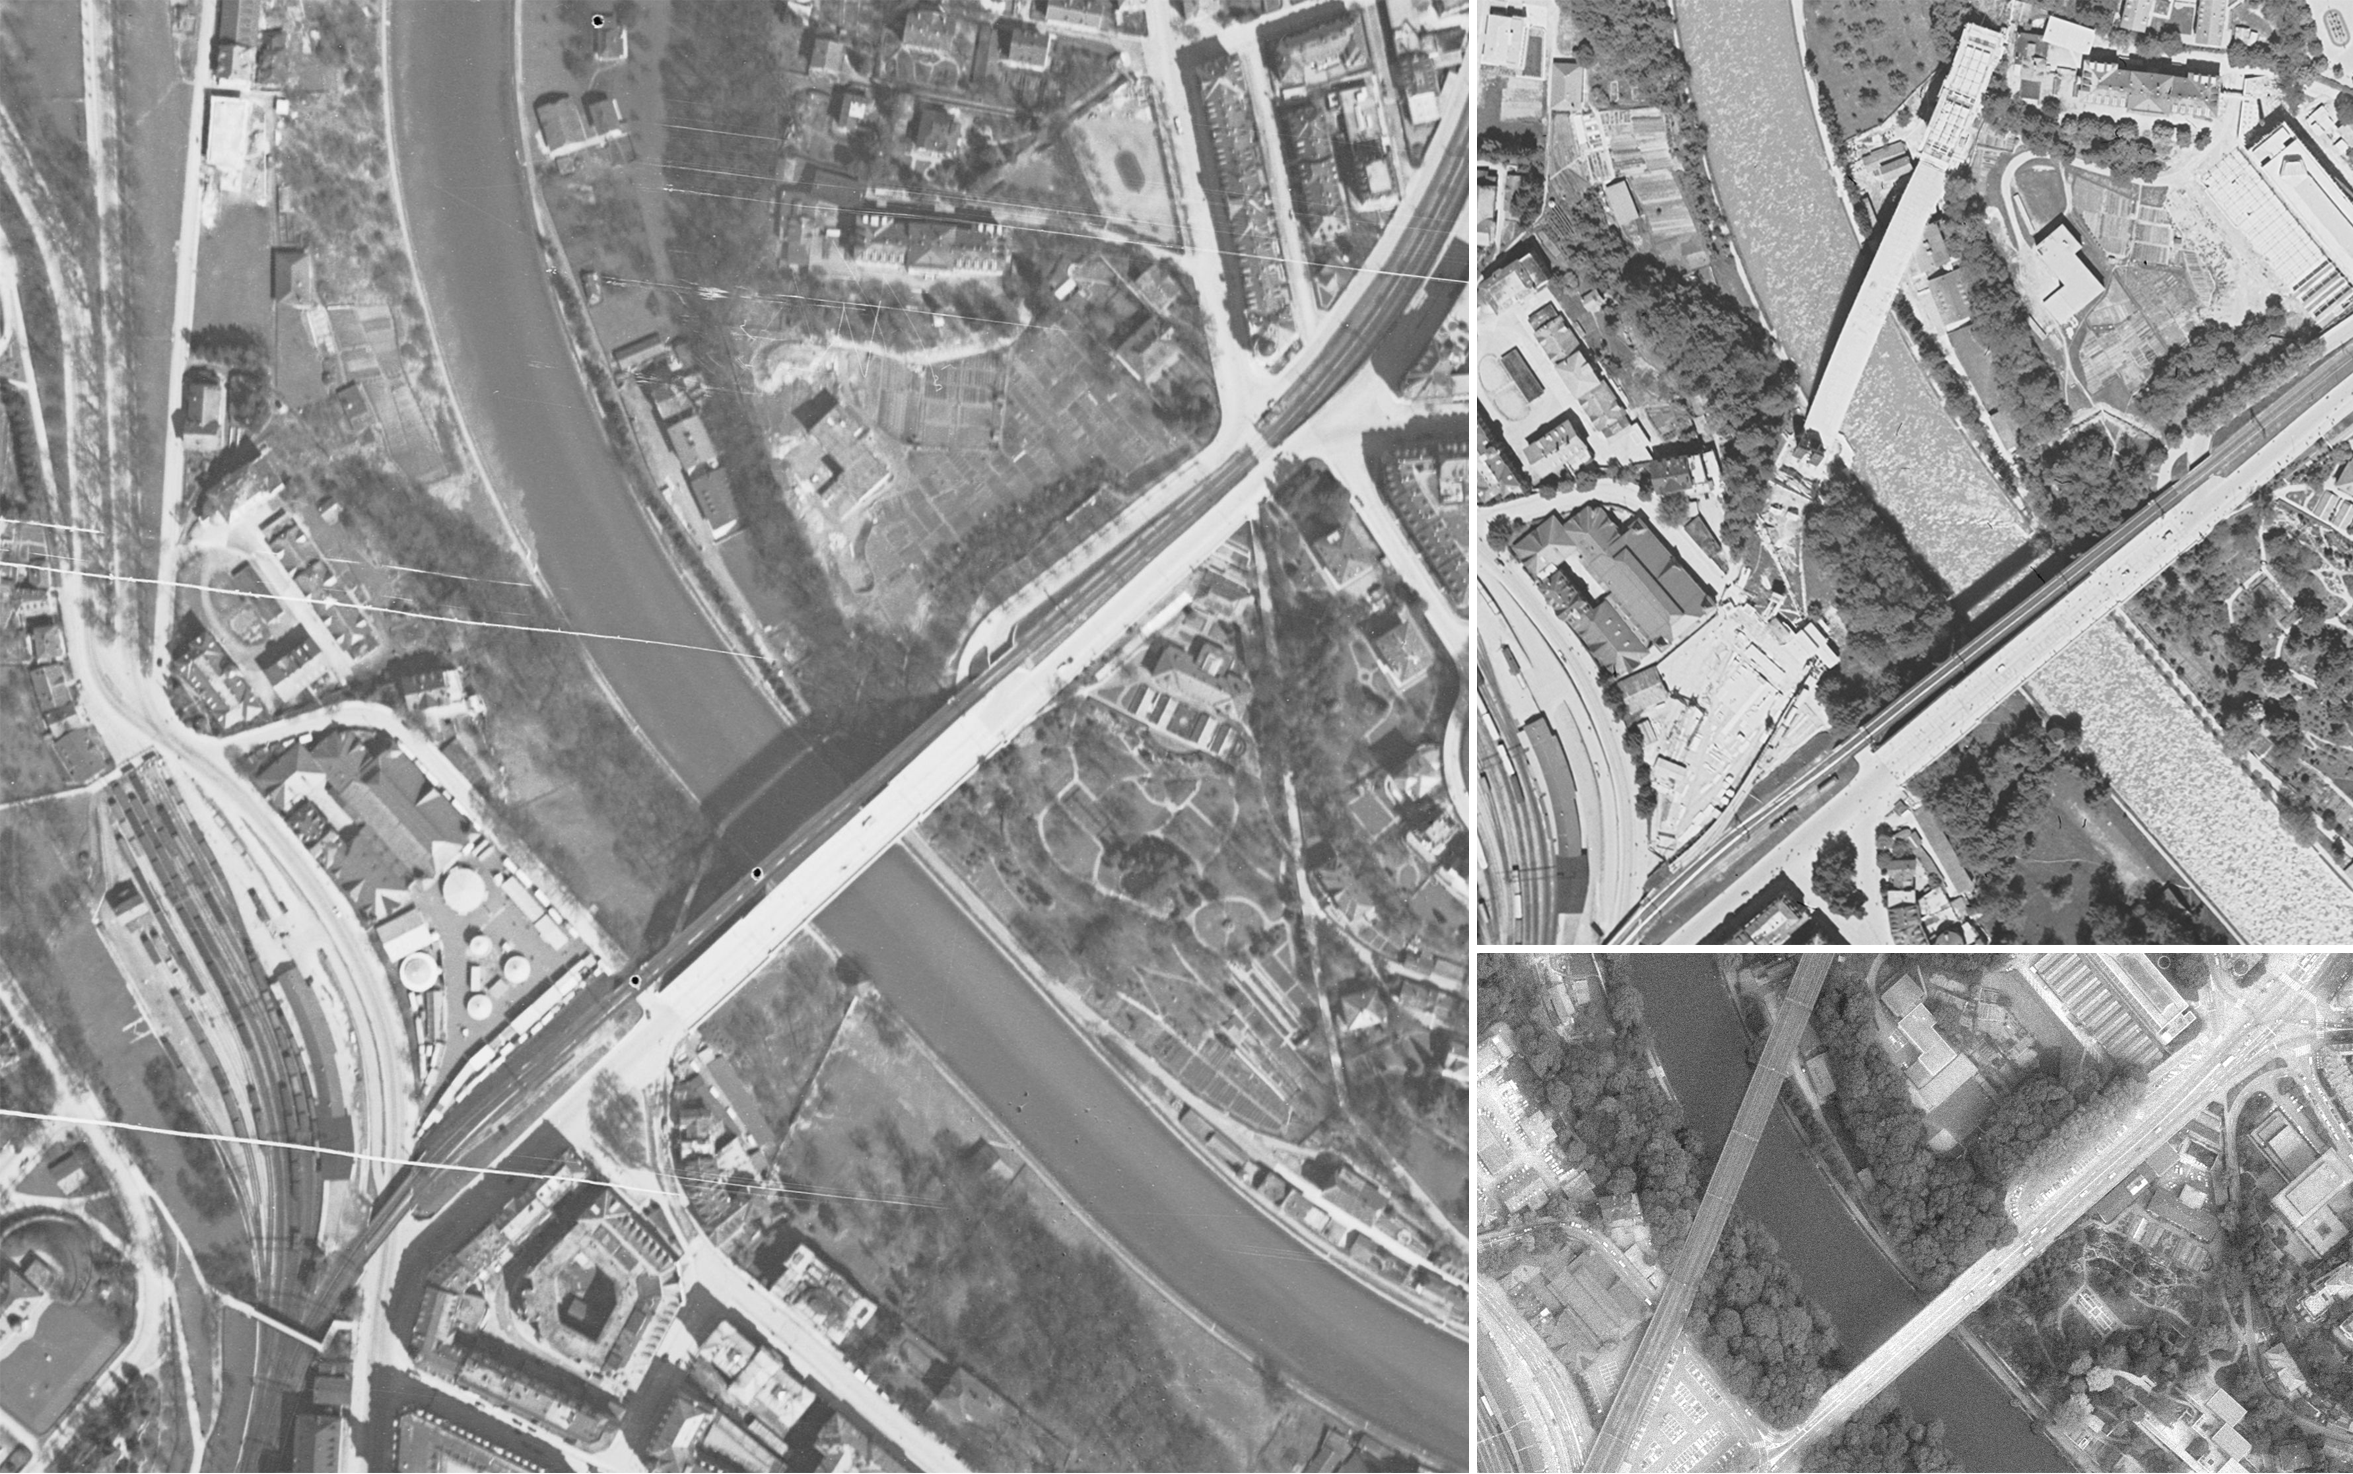 Time series of aerial photos (1931, 1938, 1981), documenting the emergence of the railway bridge in Bern